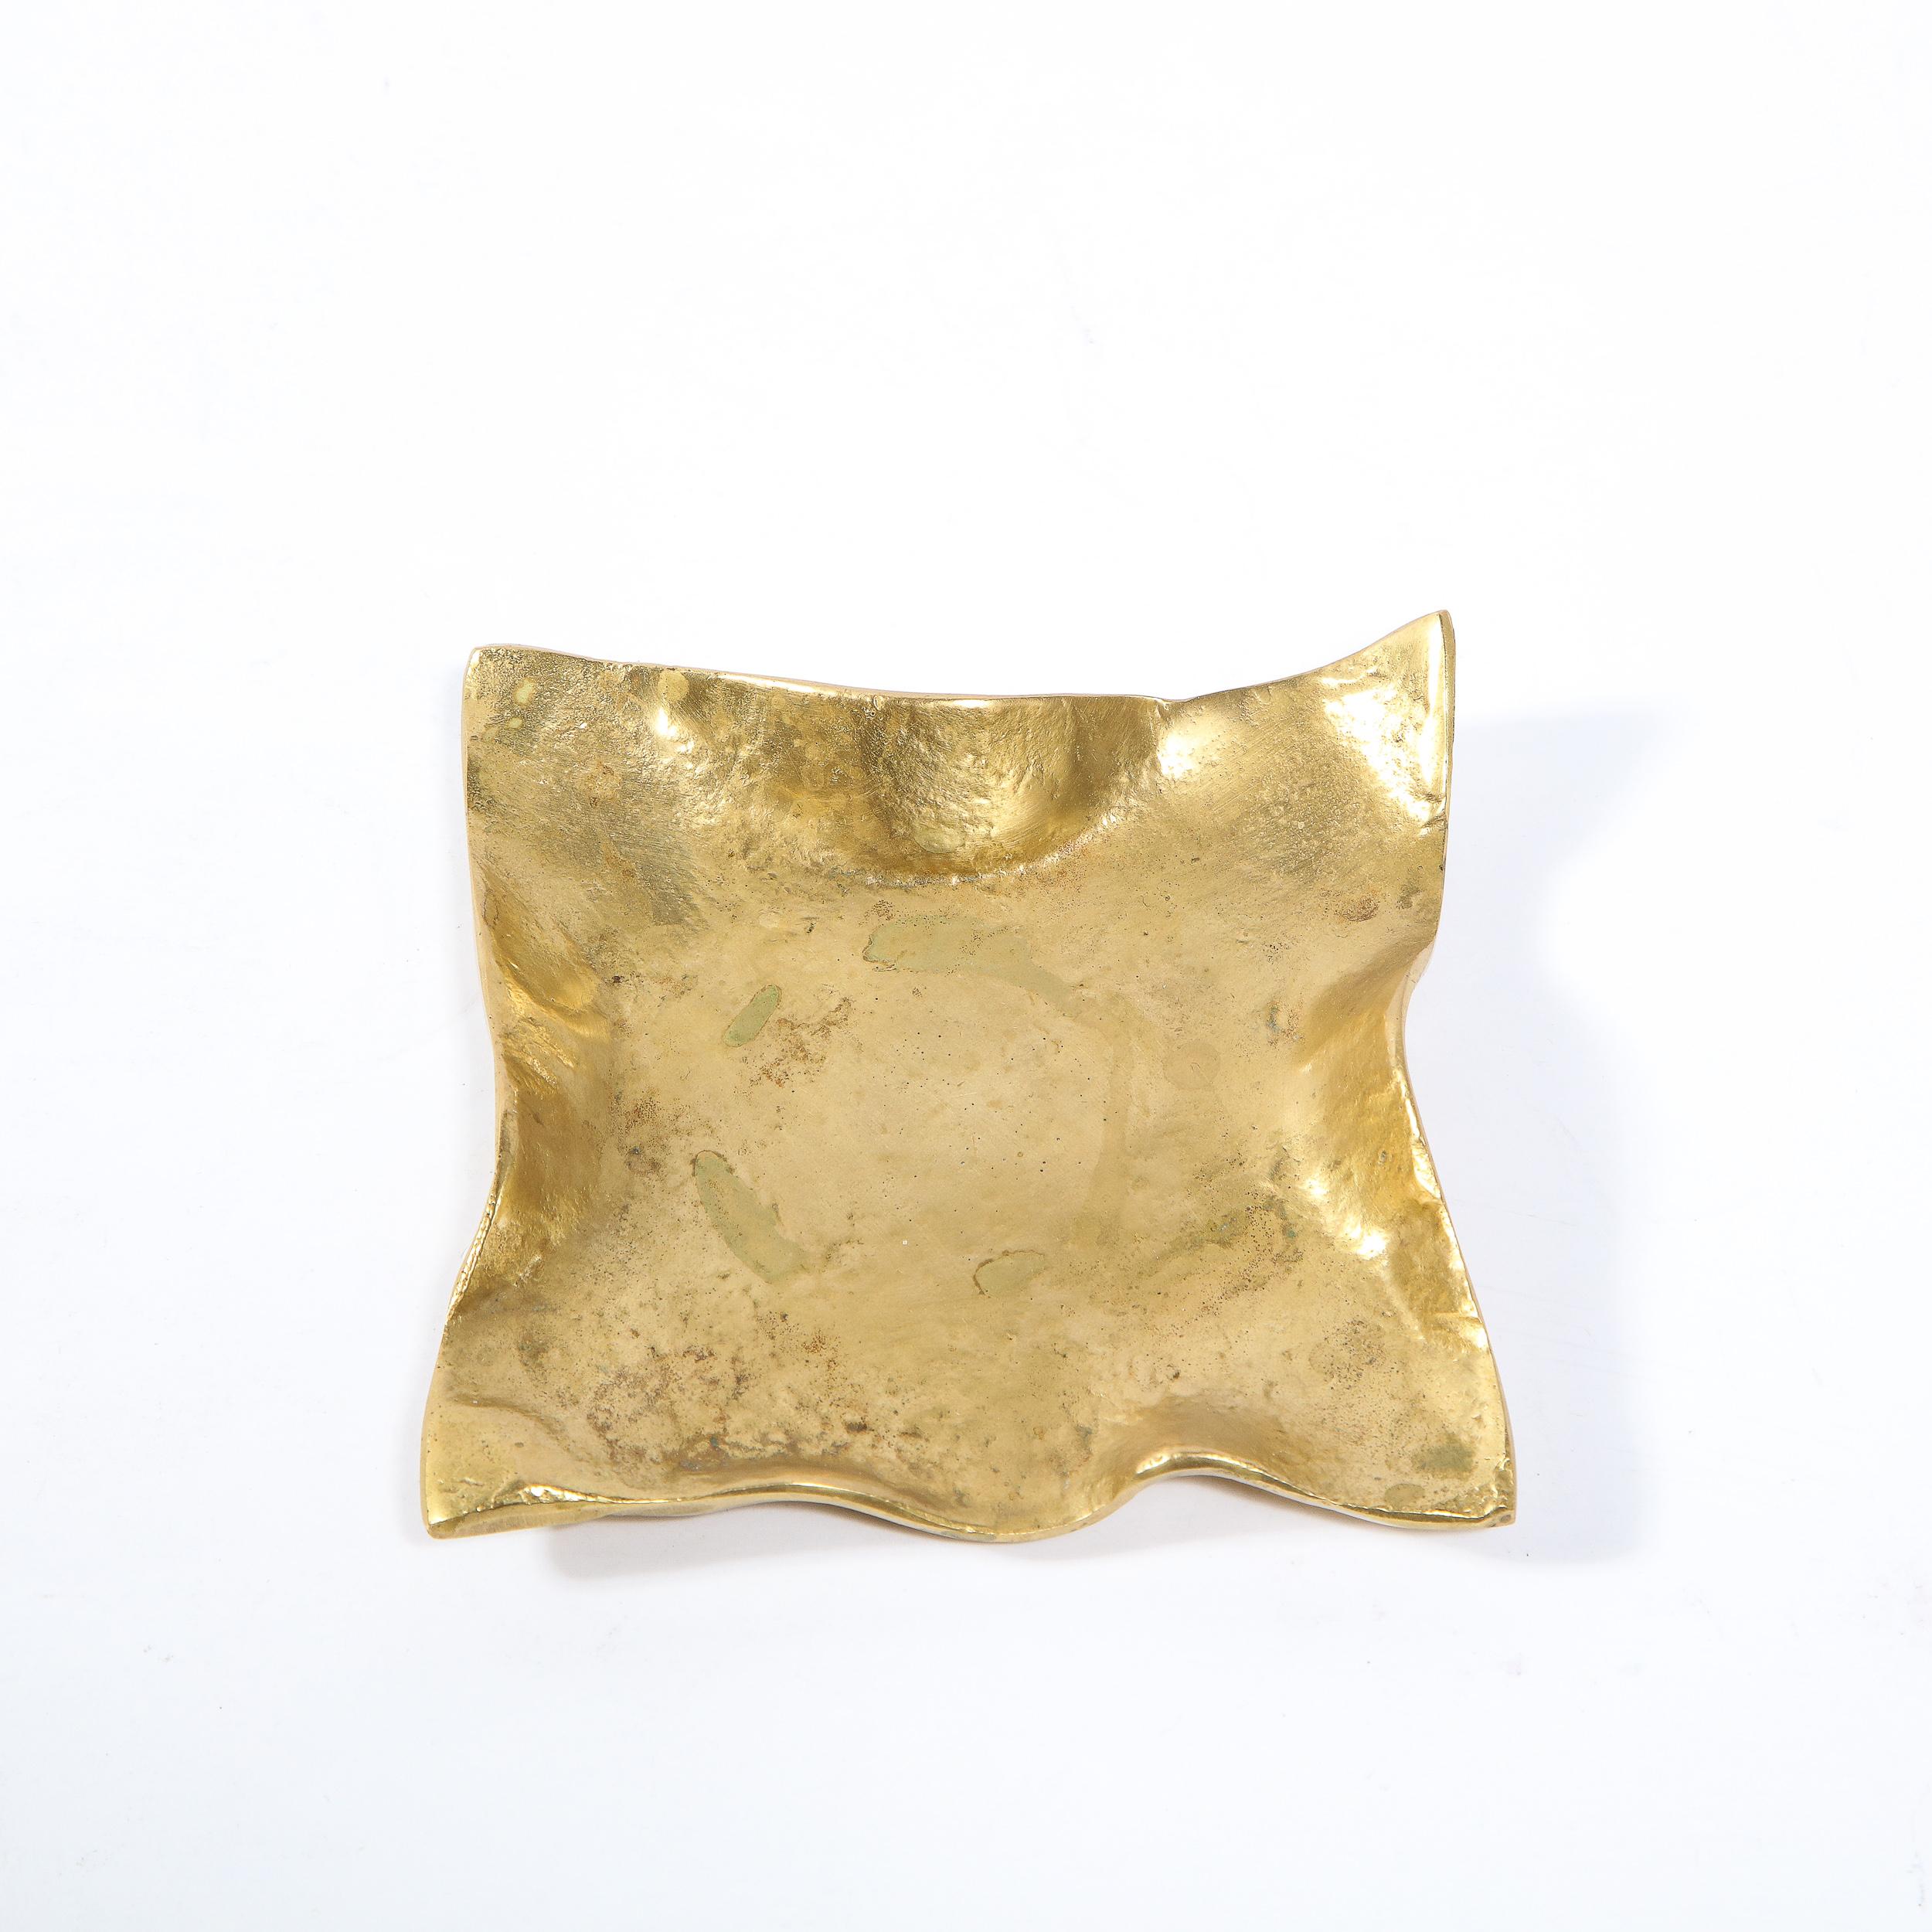 This elegant and sophisticated decorative dish was realized in the United States during the latter half of the 20th century. It features a ruffled square form in polished brass that suggests both a pocket square and a napkin. Cleverly, the piece is